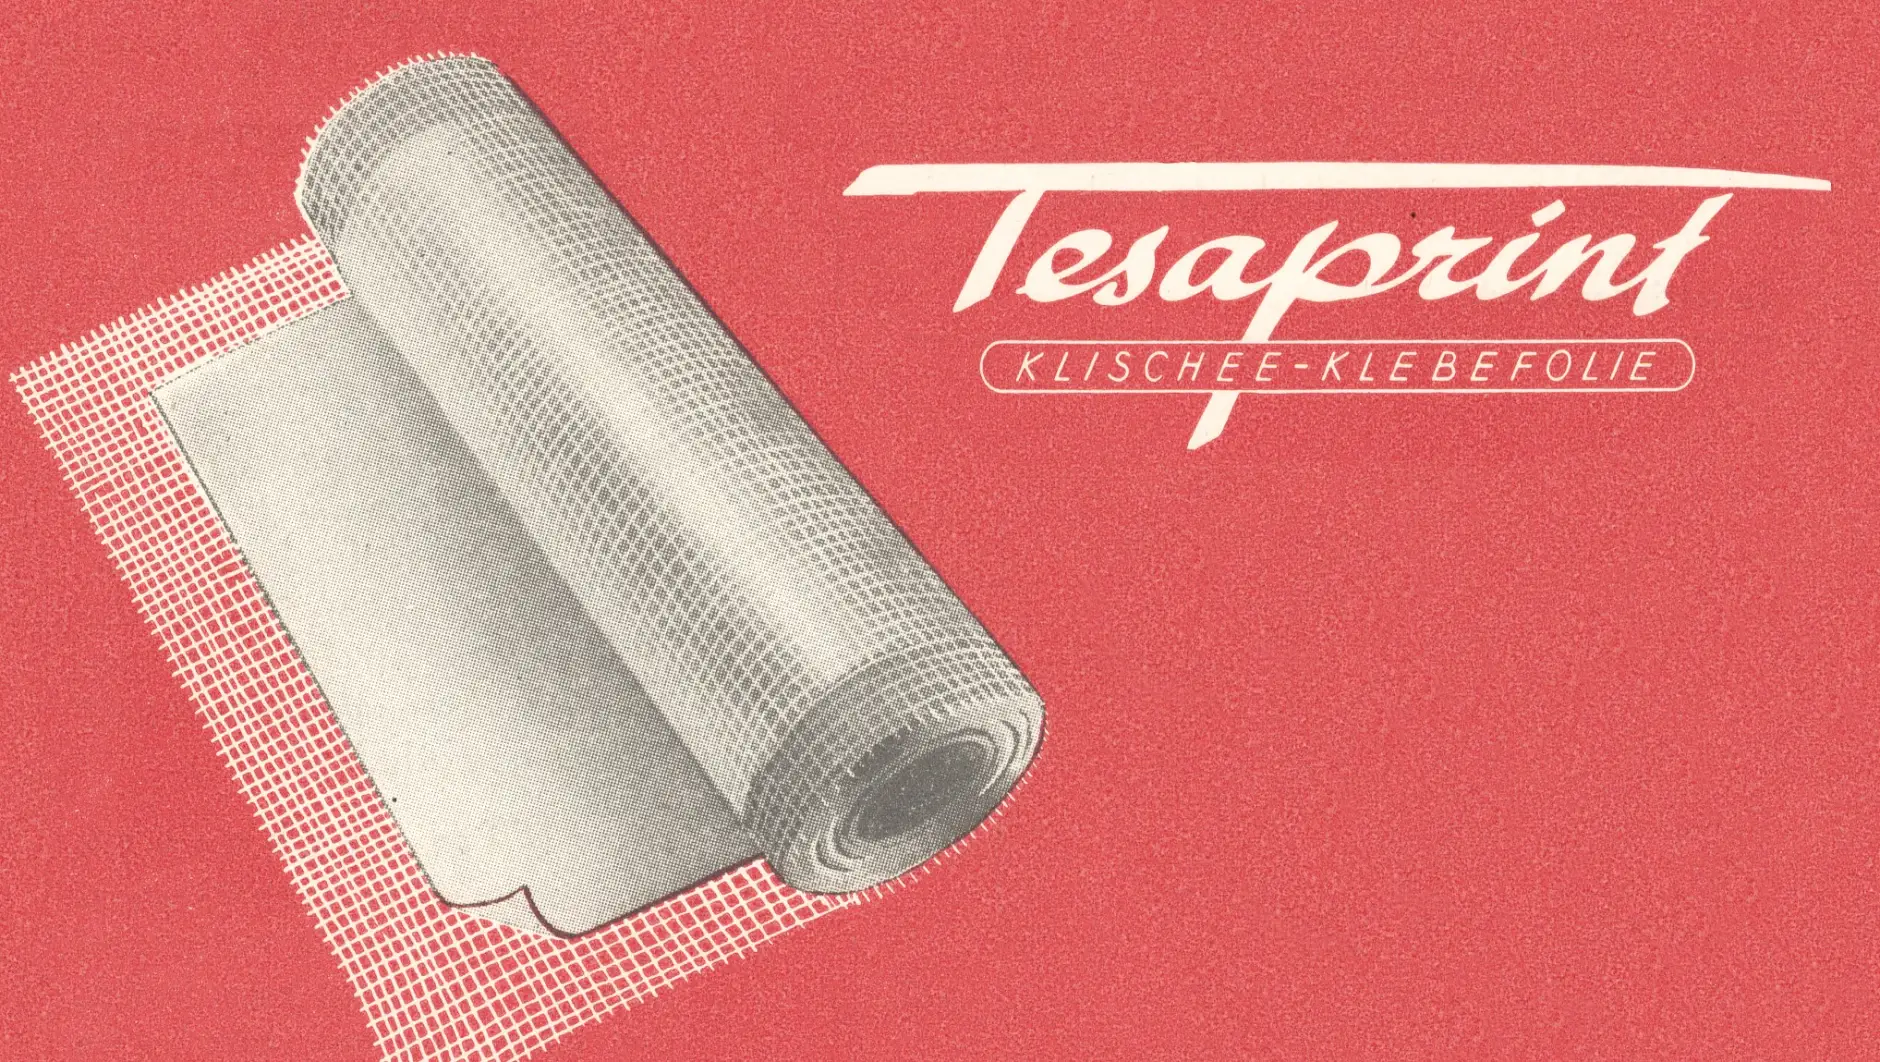 tesaprint was already being used in the printing industry in 1949.